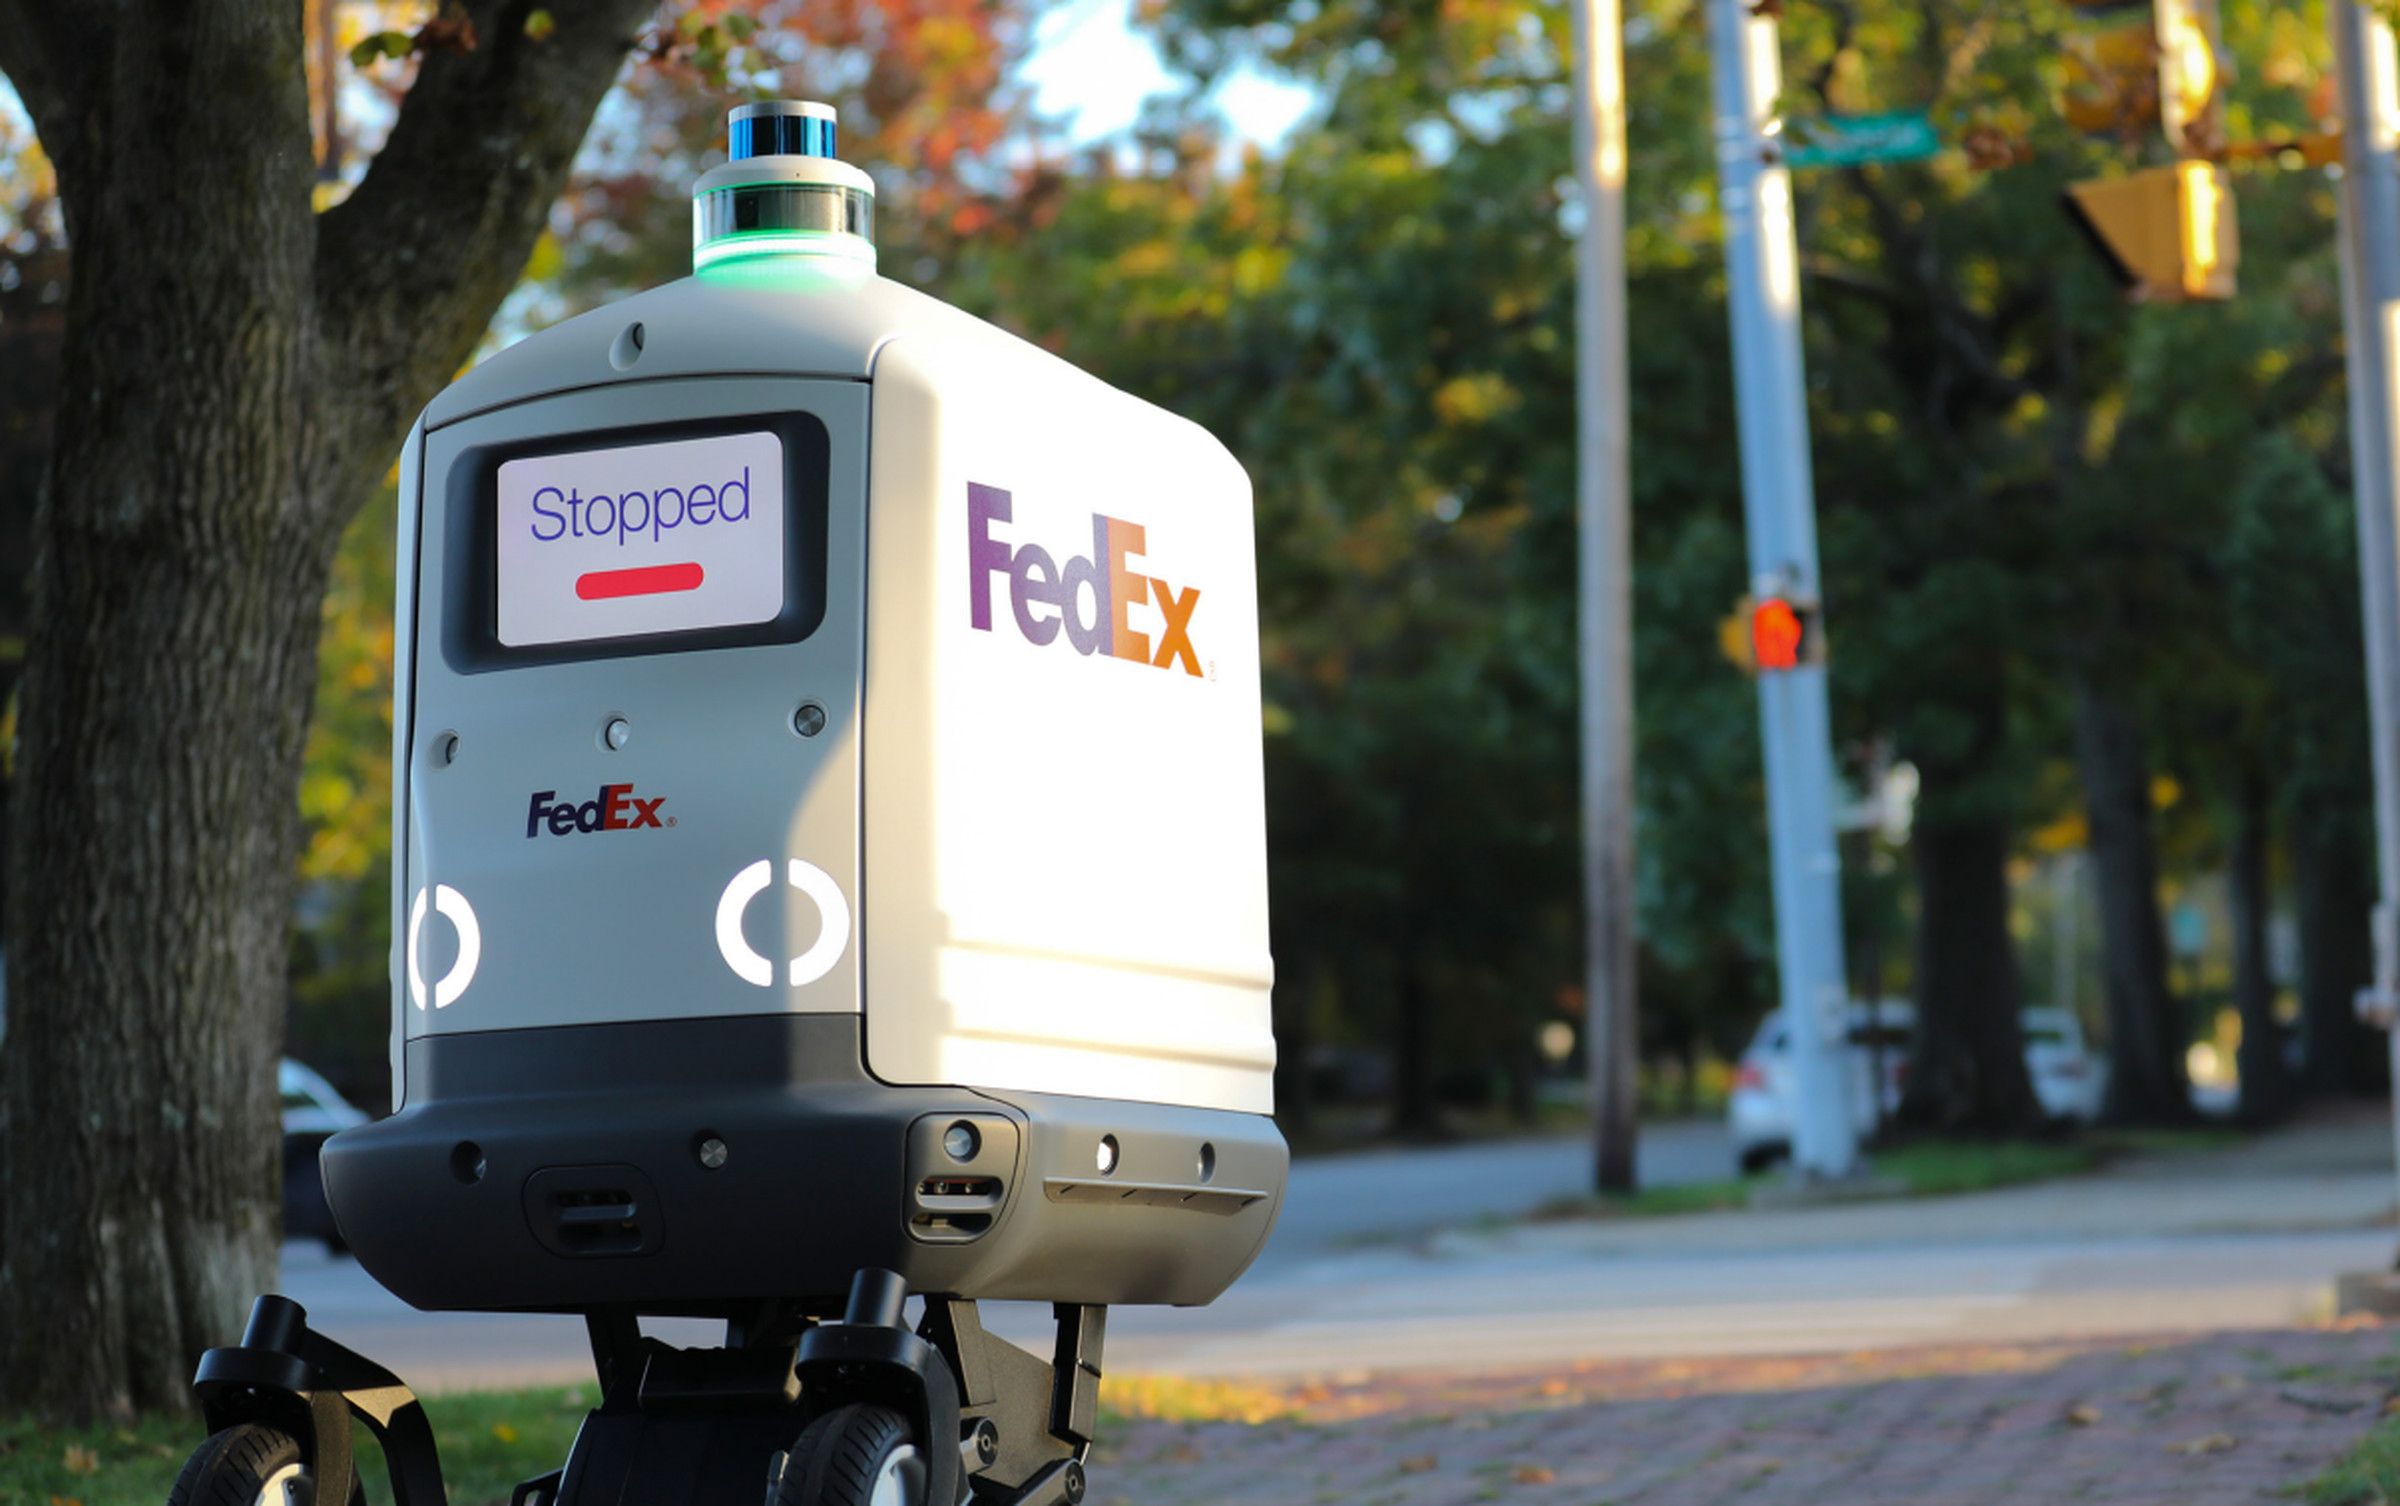 A photograph of a delivery robot with a screen on the front saying “Stopped.”